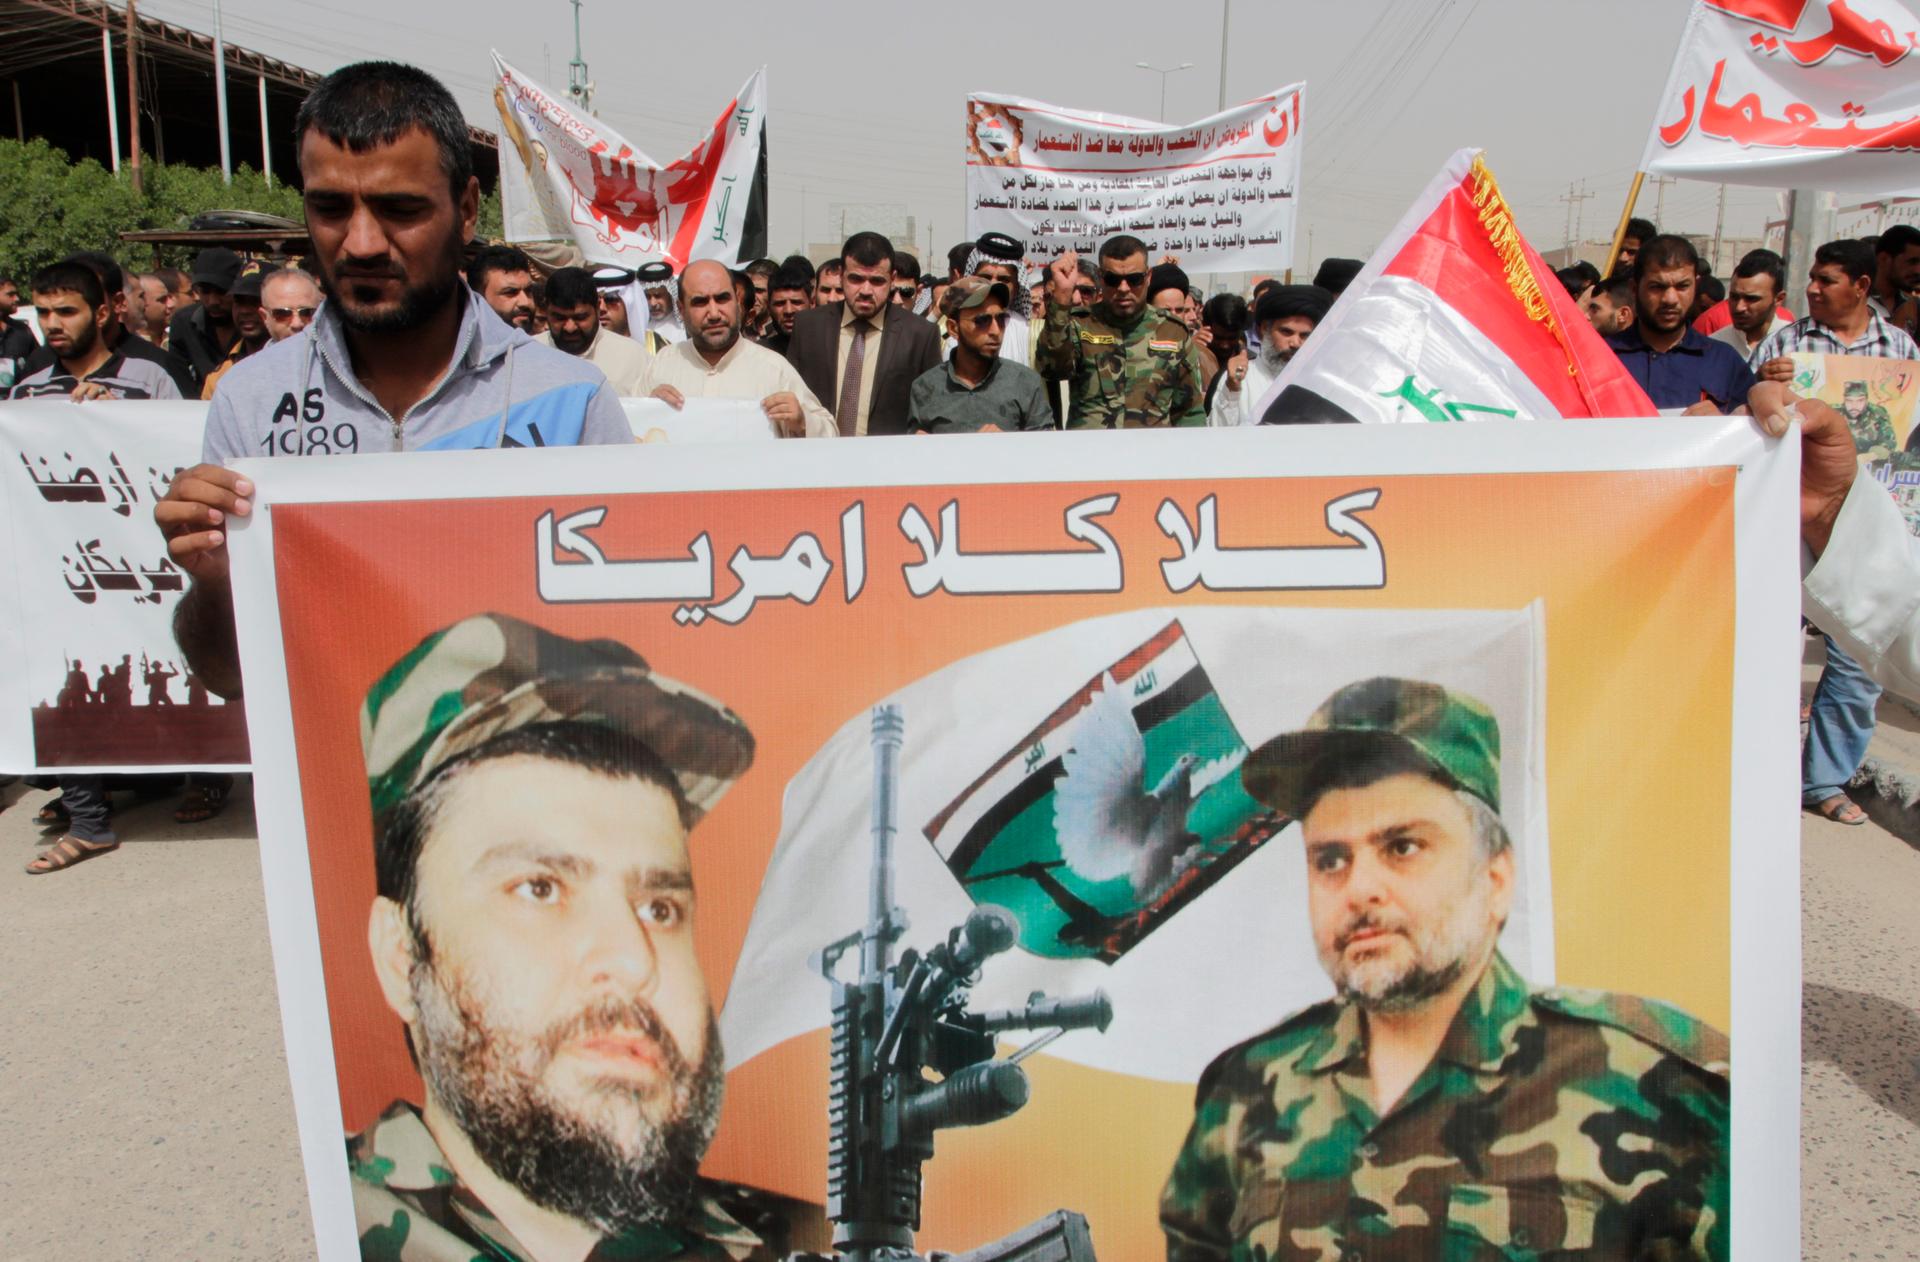 A demonstrator holds a banner with a picture of Shiite cleric Moqtada al-Sadr during a protest against the entry of American troops into Iraq on September 26, 2014. The words on the banner read "No No America."